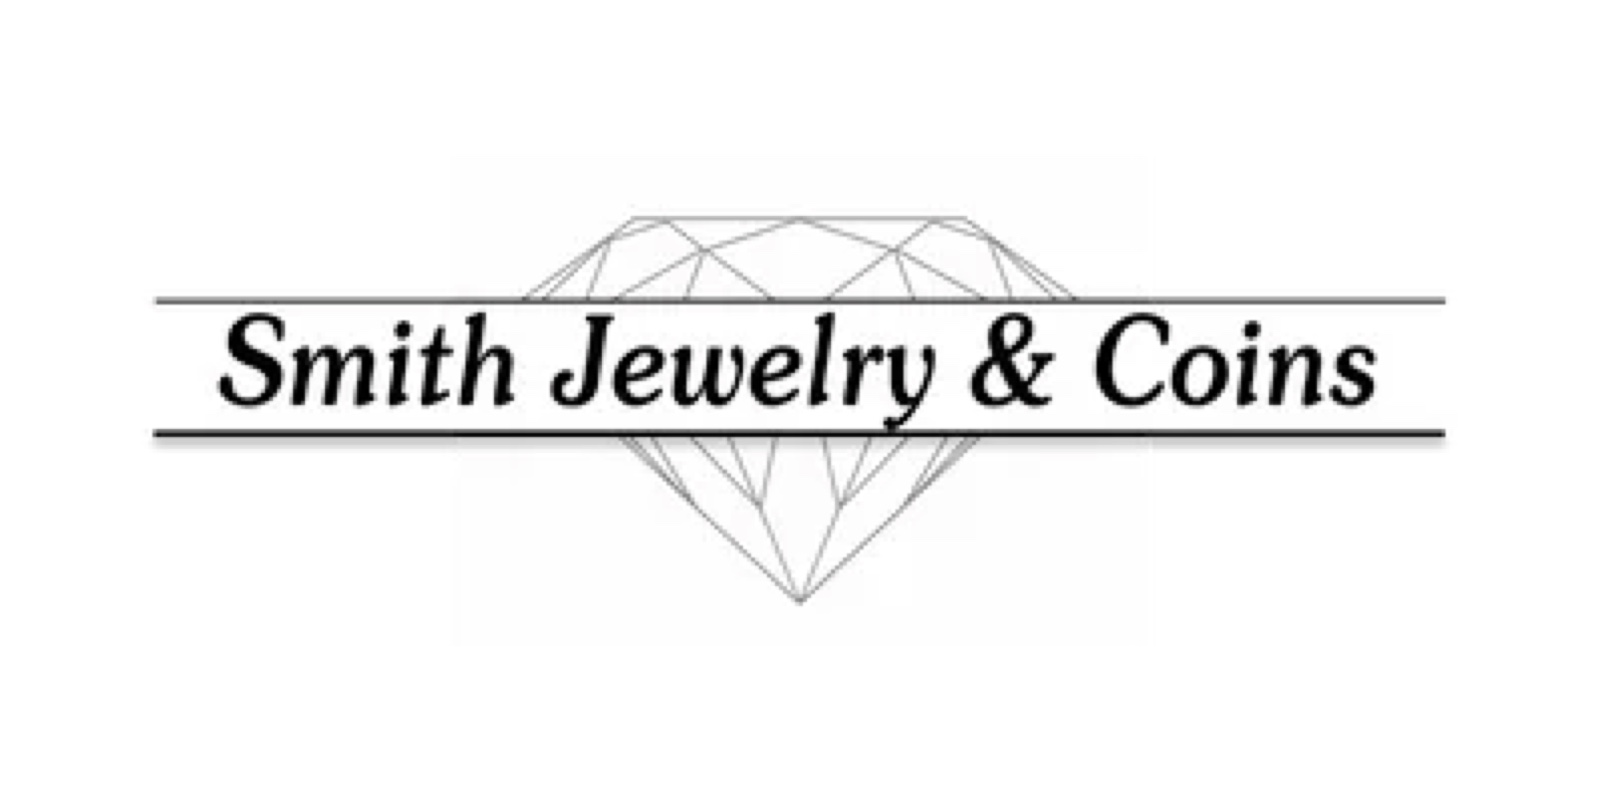 Smith Jewelry & Coins